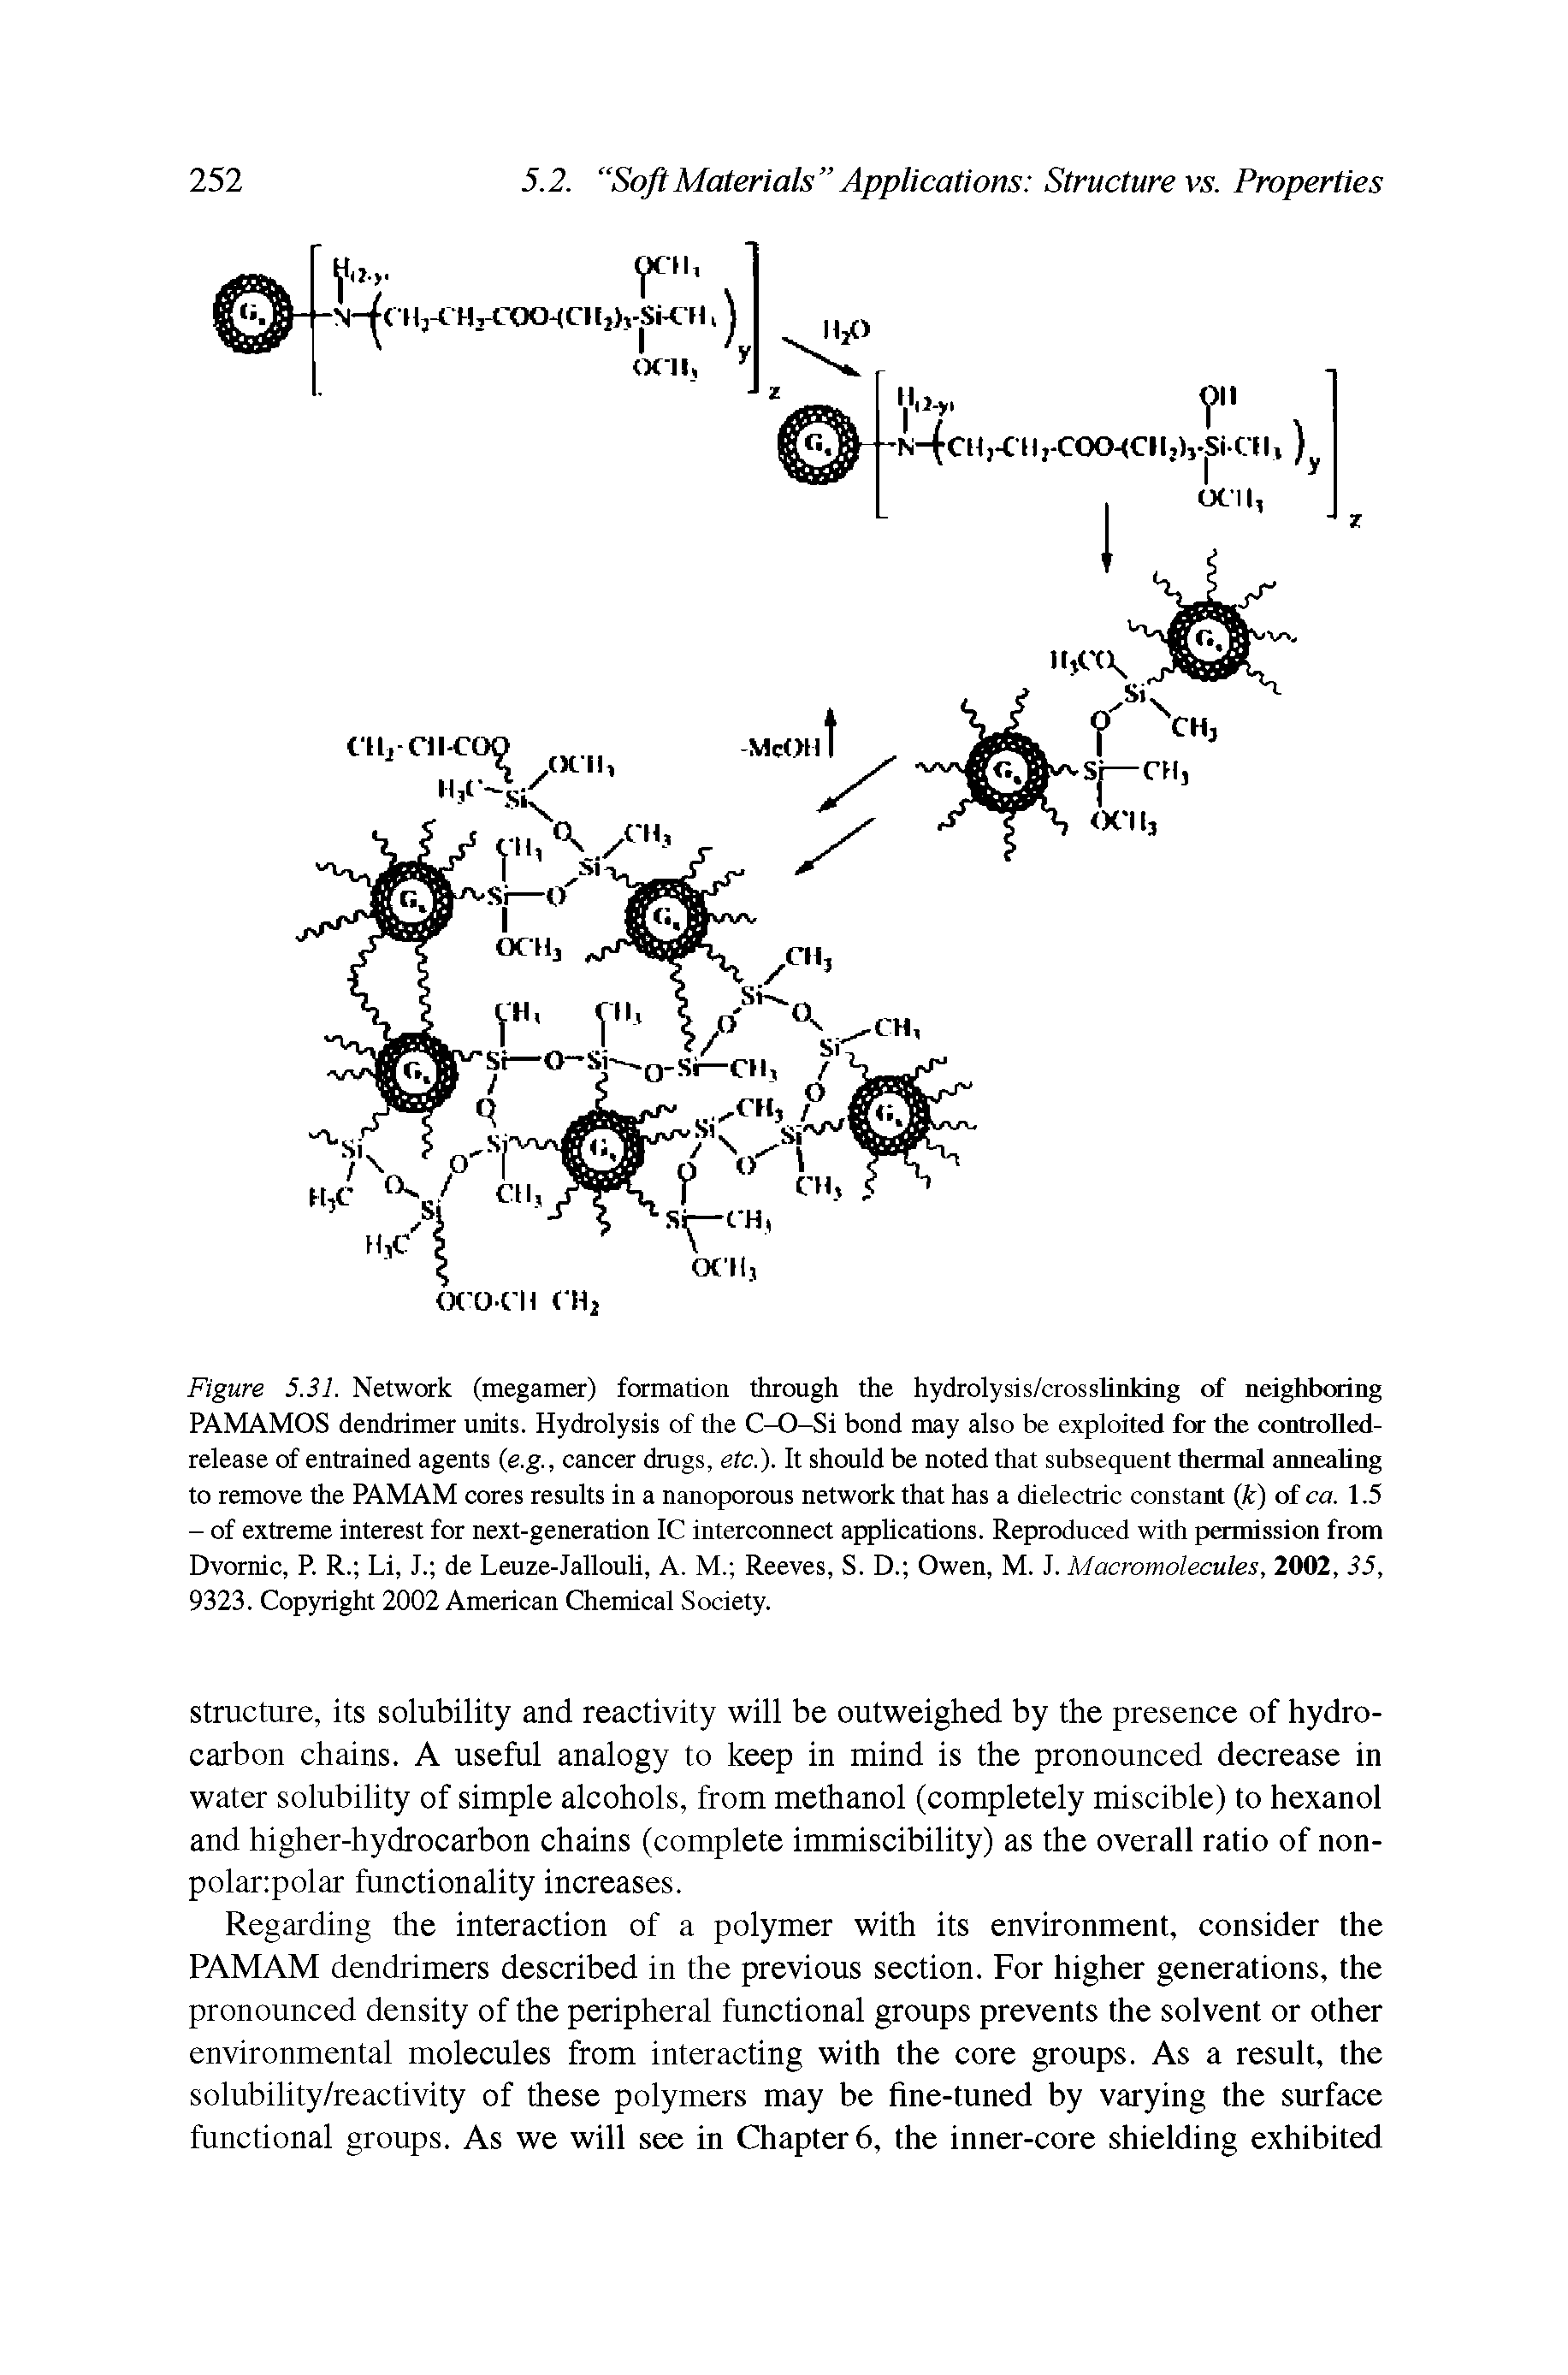 Figure 5.31. Network (megamer) formation through the hydrolysis/crosslinMng of neighboring PAMAMOS dendrimer units. Hydrolysis of the C-O-Si bond may also be exploited for the controlled-release of entrained agents (e.g, cancer drugs, etc.). It should be noted that subsequent thermal annealing to remove the PAMAM cores results in a nanoporous network that has a dielectric constant (k) of ca. 1.5 - of extreme interest for next-generation IC interconnect applications. Reproduced with permission from Dvornic, P. R. Li, J. de Leuze-Jallouli, A. M. Reeves, S. D. Owen, M. J. Macromolecules, 2002, 35, 9323. Copyright 2002 American Chemical Society.